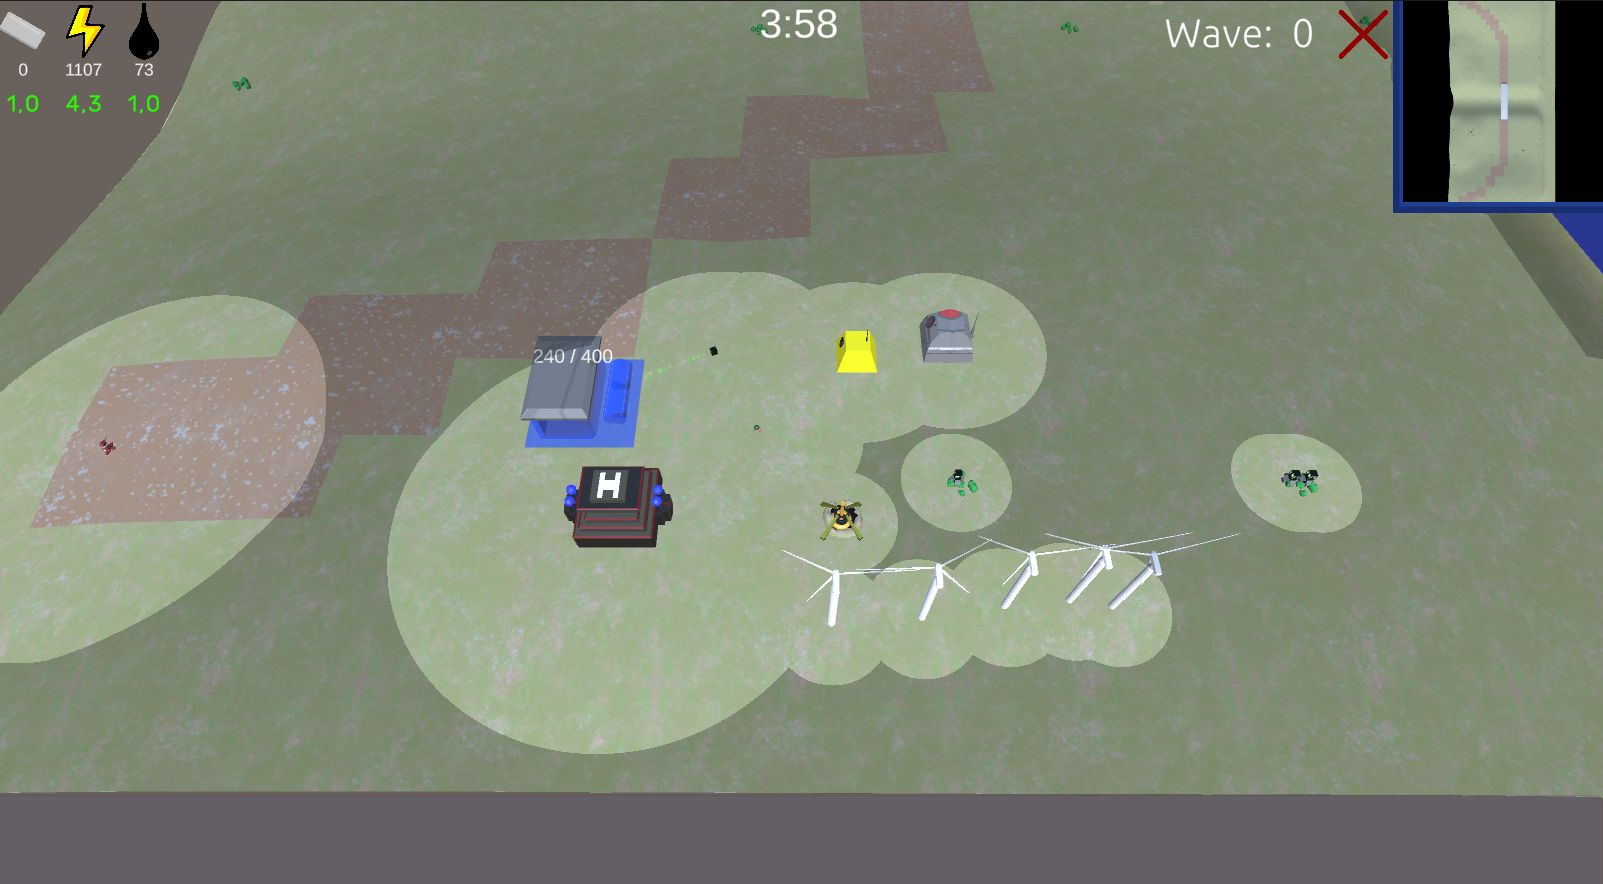 Just simple RTS game